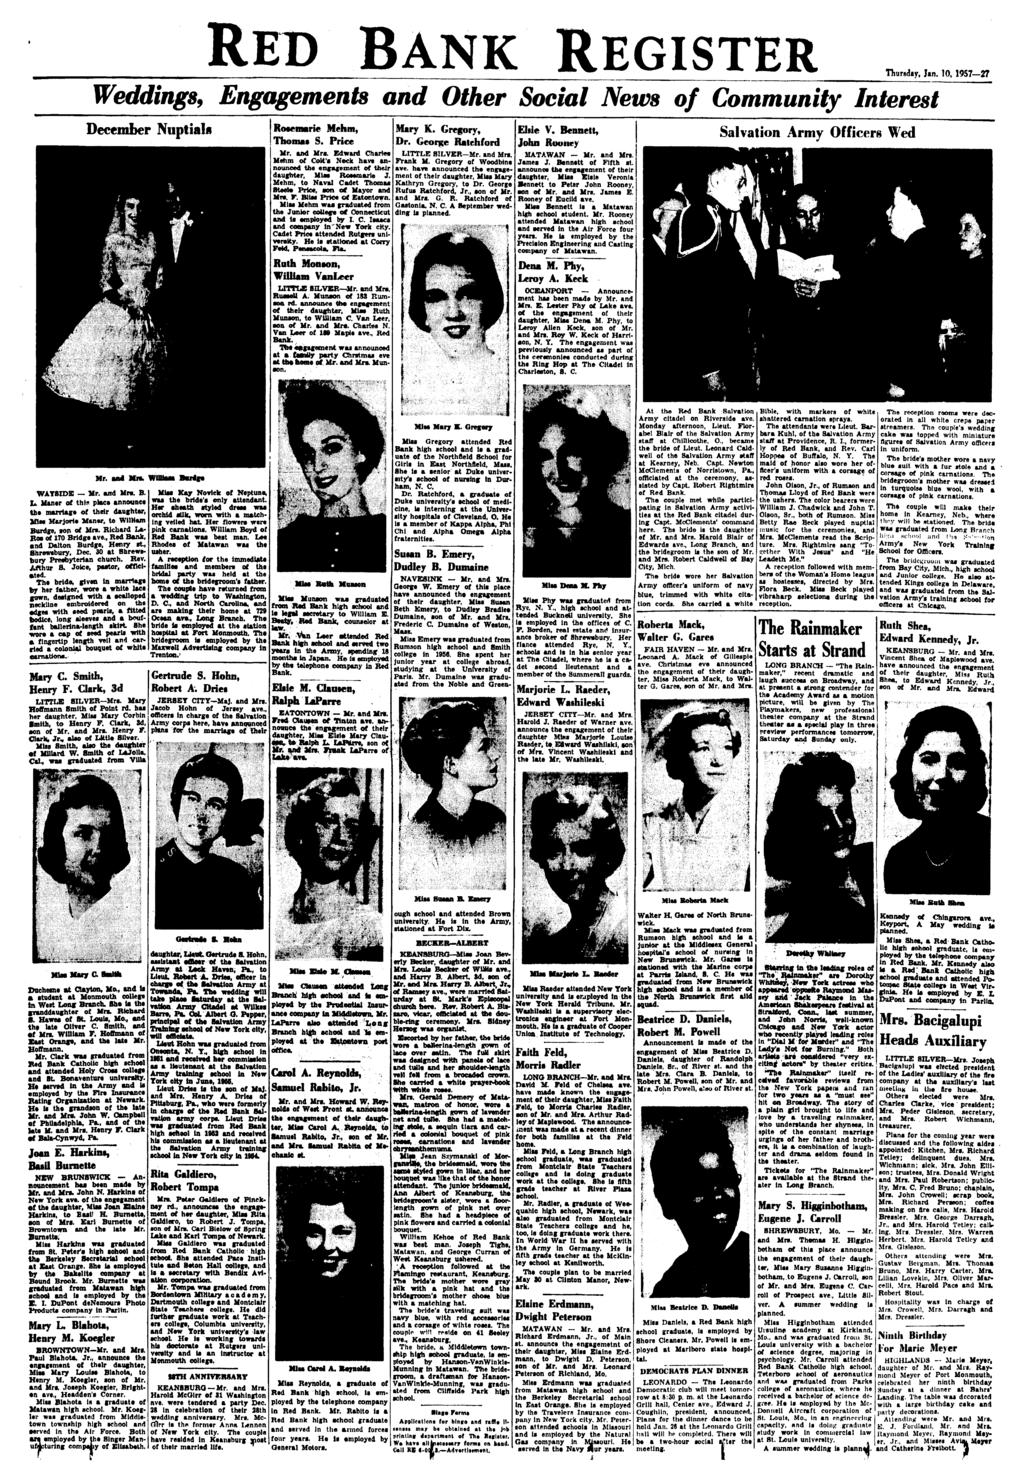 RED BANK REGISTER Thursday, Jin. 10, 1957 27 Weddings, Engagements and Other Social News of Community Interest December Nuptials Rotemarie Mehm, Thomas S. Price Mr. and Mrs.